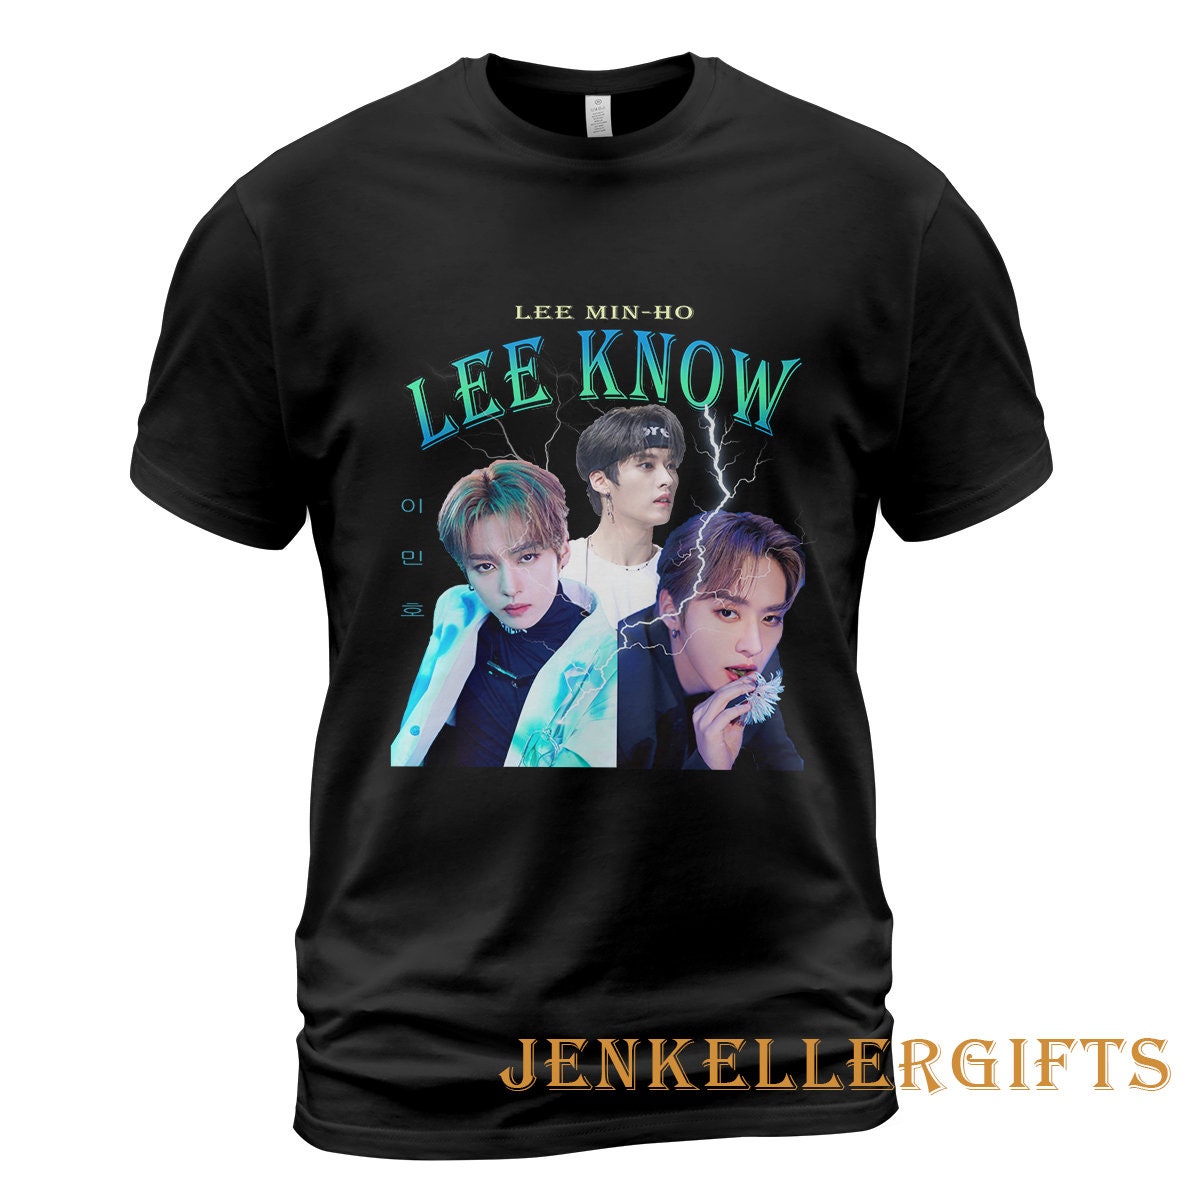 Discover LEE KNOW T-shirt, Unisex Shirt